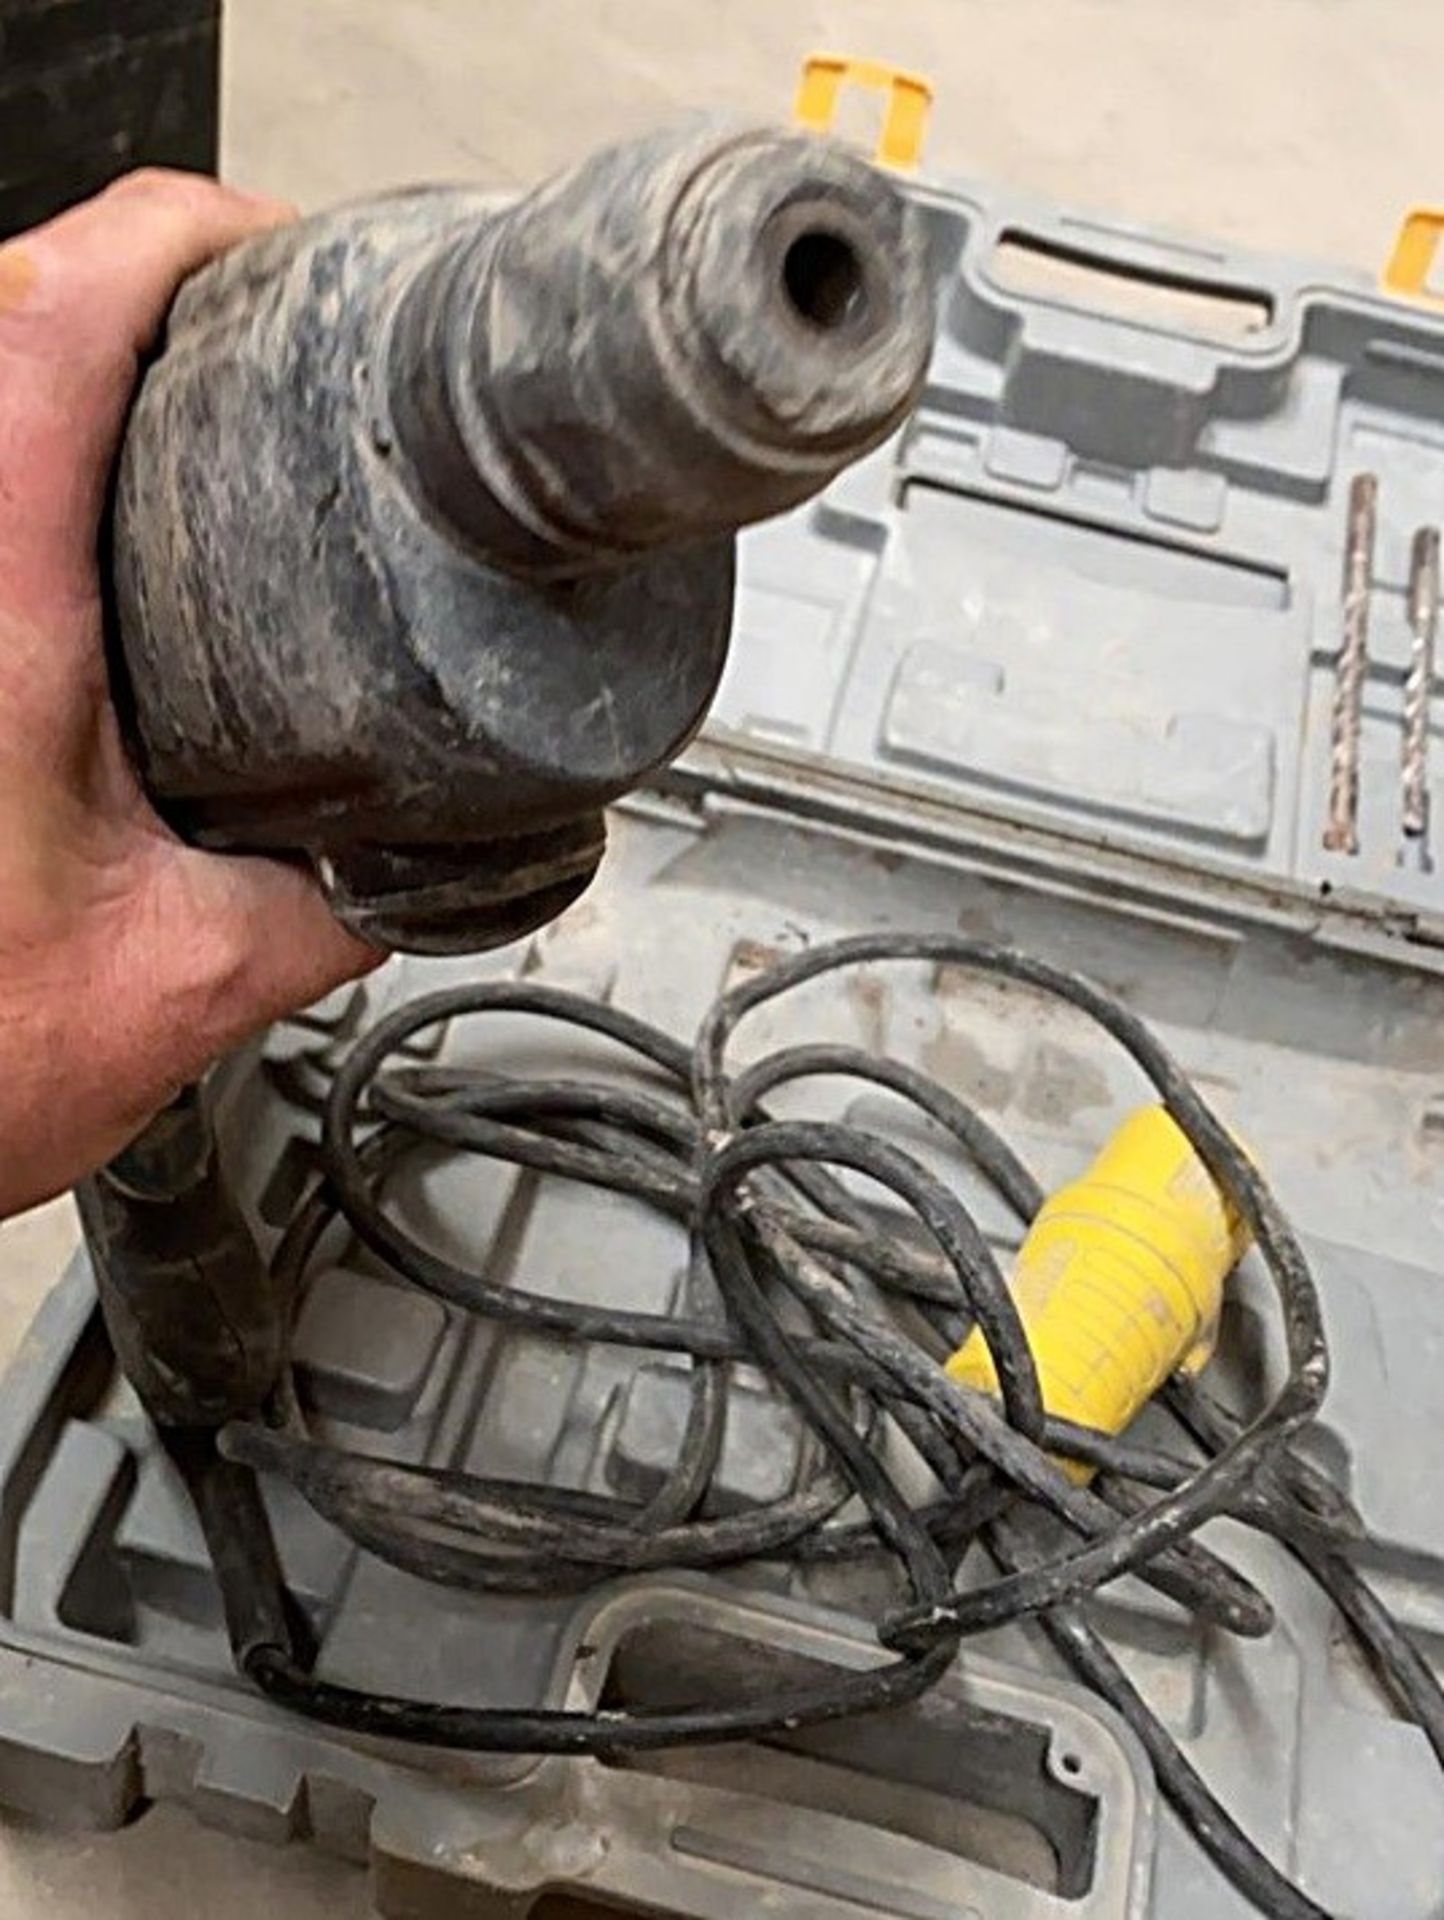 1 x Ryobi 110V Impact Drill - Used, Recently Removed From A Working Site - CL505 - Ref: TL027 - - Image 2 of 5